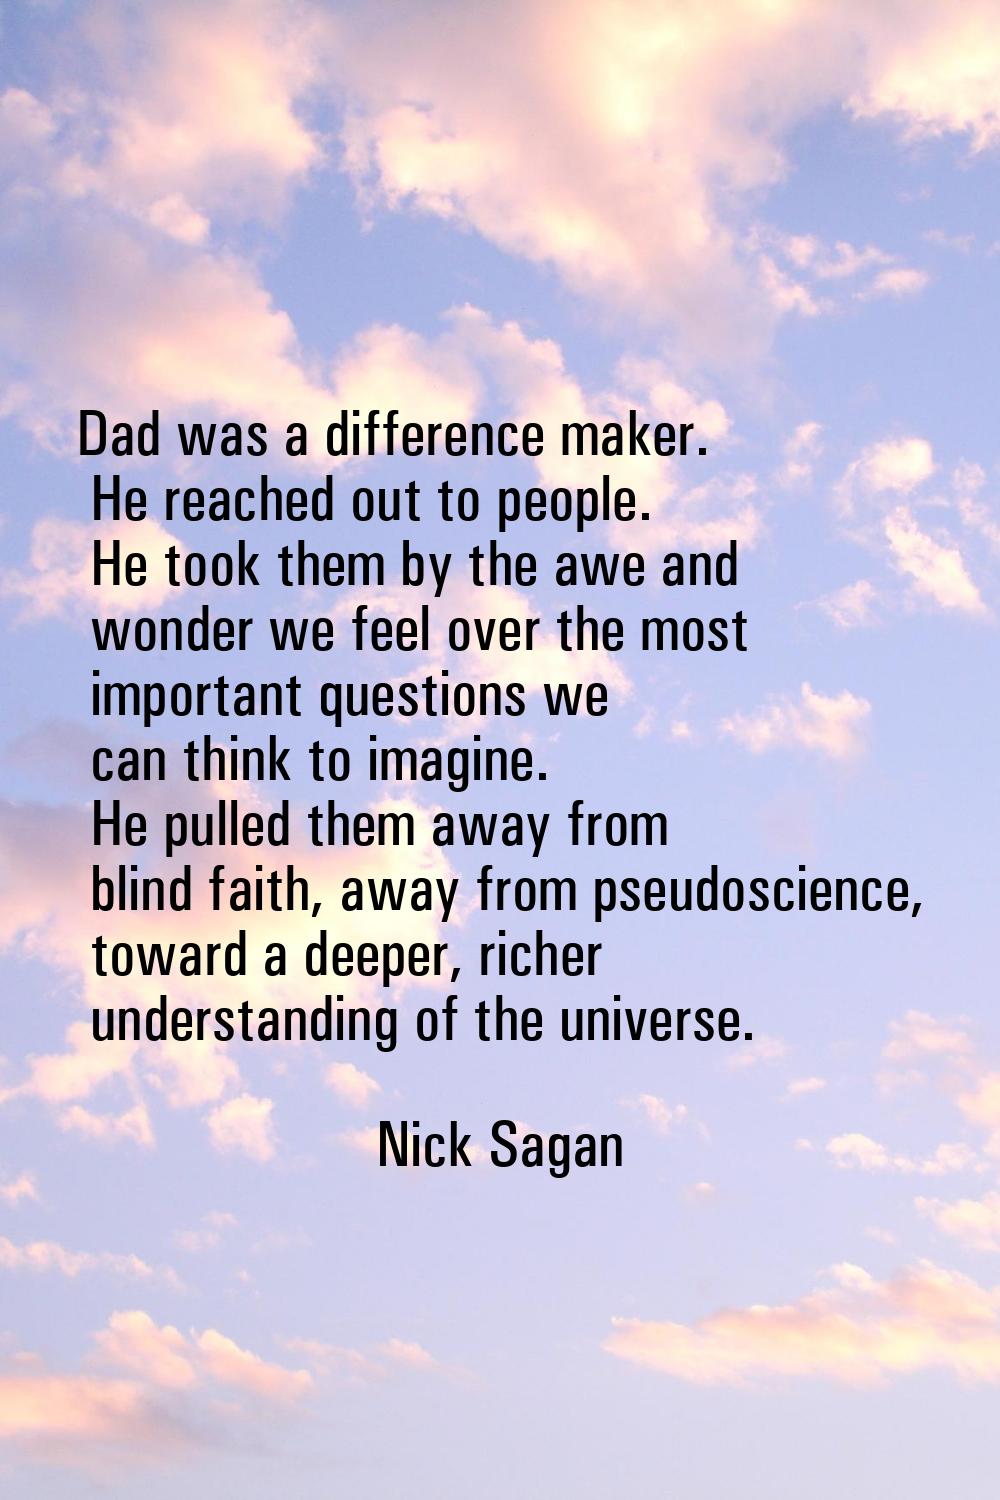 Dad was a difference maker. He reached out to people. He took them by the awe and wonder we feel ov